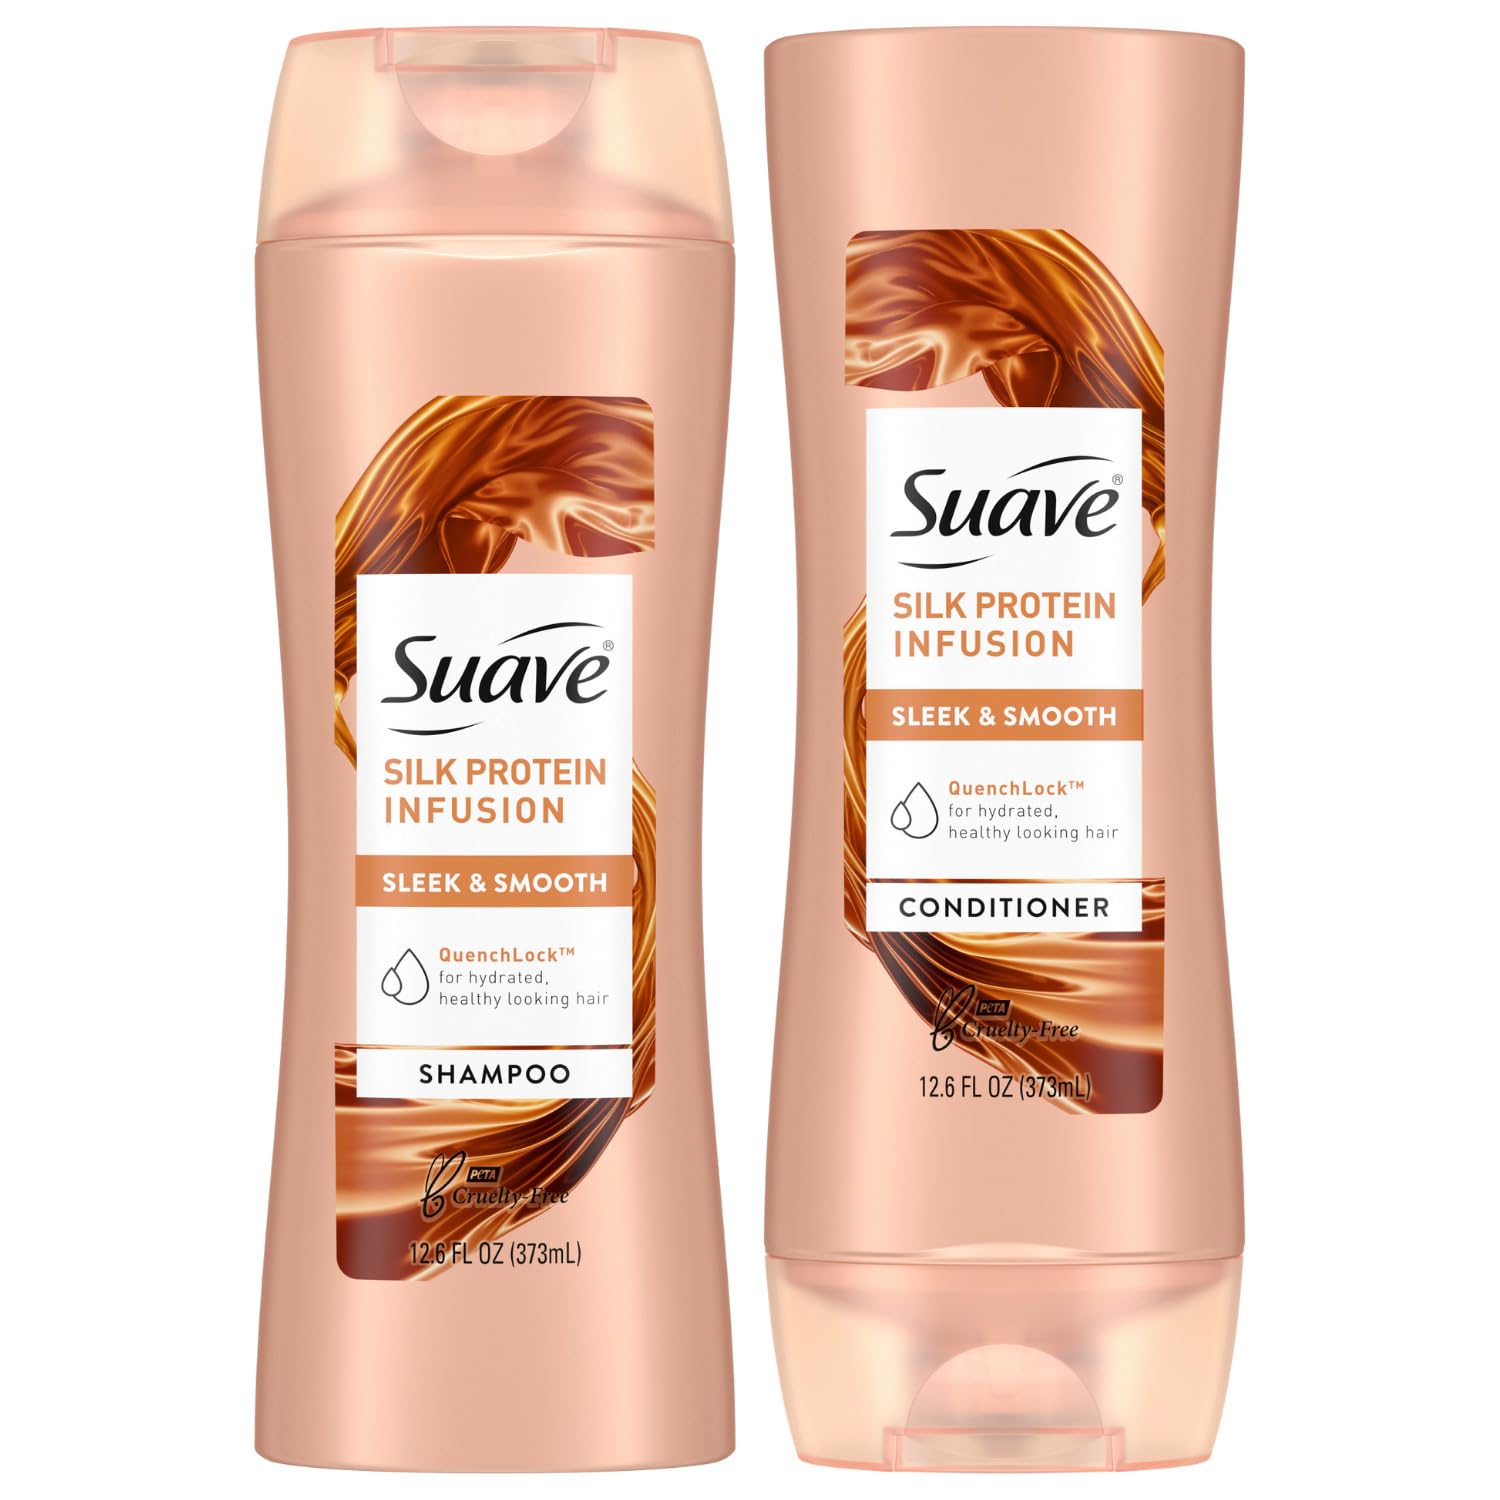 Suave Shampoo and Conditioner Set, Silk Protein Infusion, Sleek & Smooth – Protein Hair Treatment for Dry, Damaged Hair, Detangler, 48H Frizz Control, 12.6 Oz Ea (2 Piece Set)